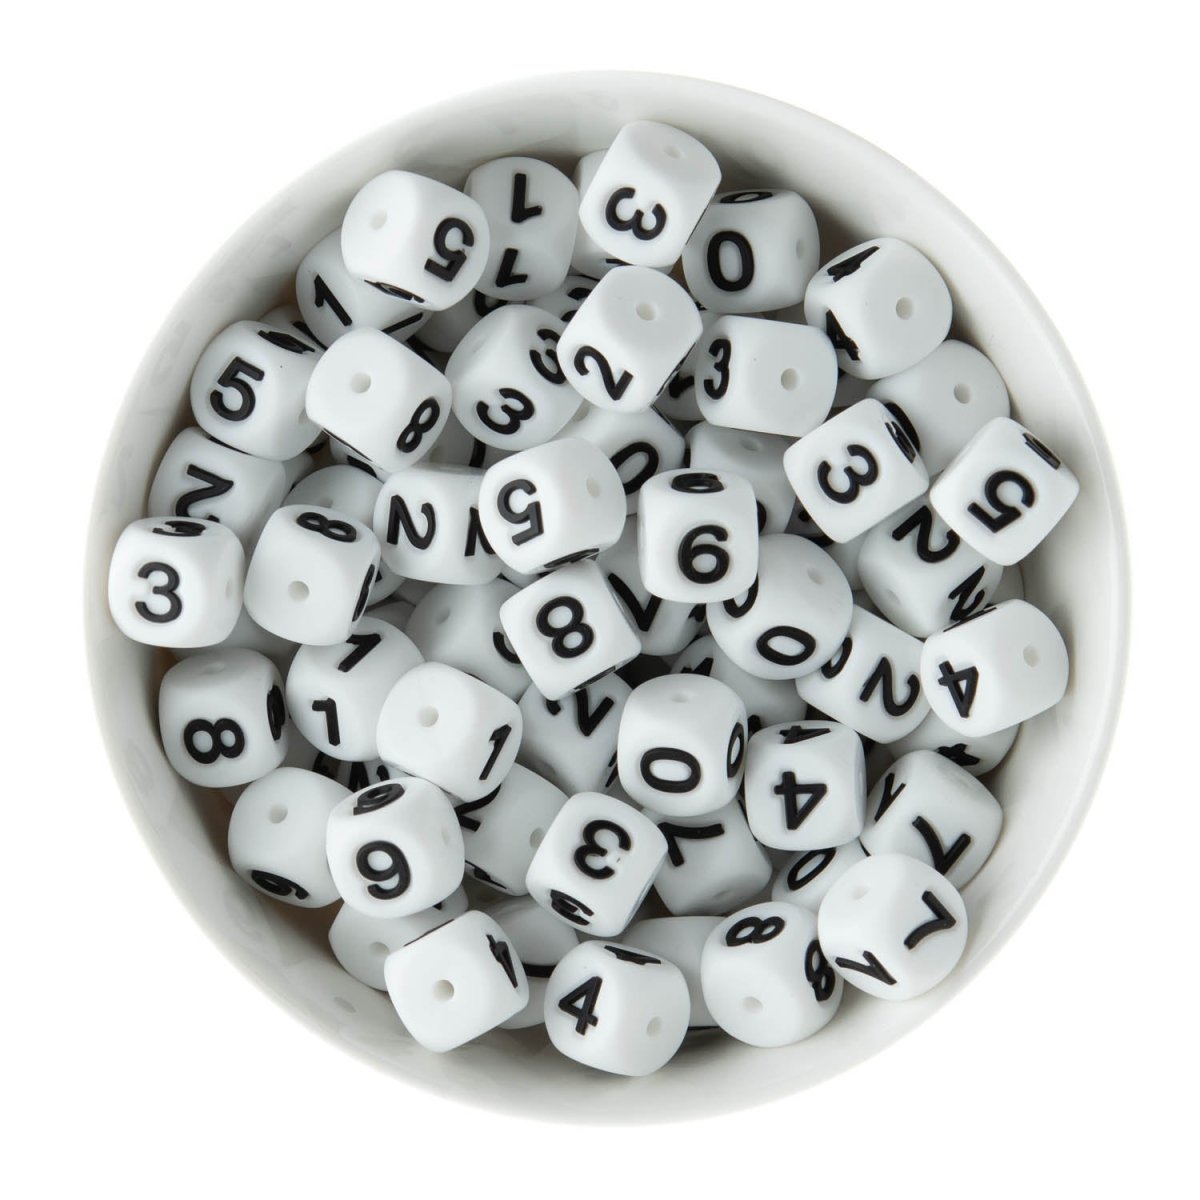 Silicone Shape Beads Numbers - Square White 0 from Cara & Co Craft Supply